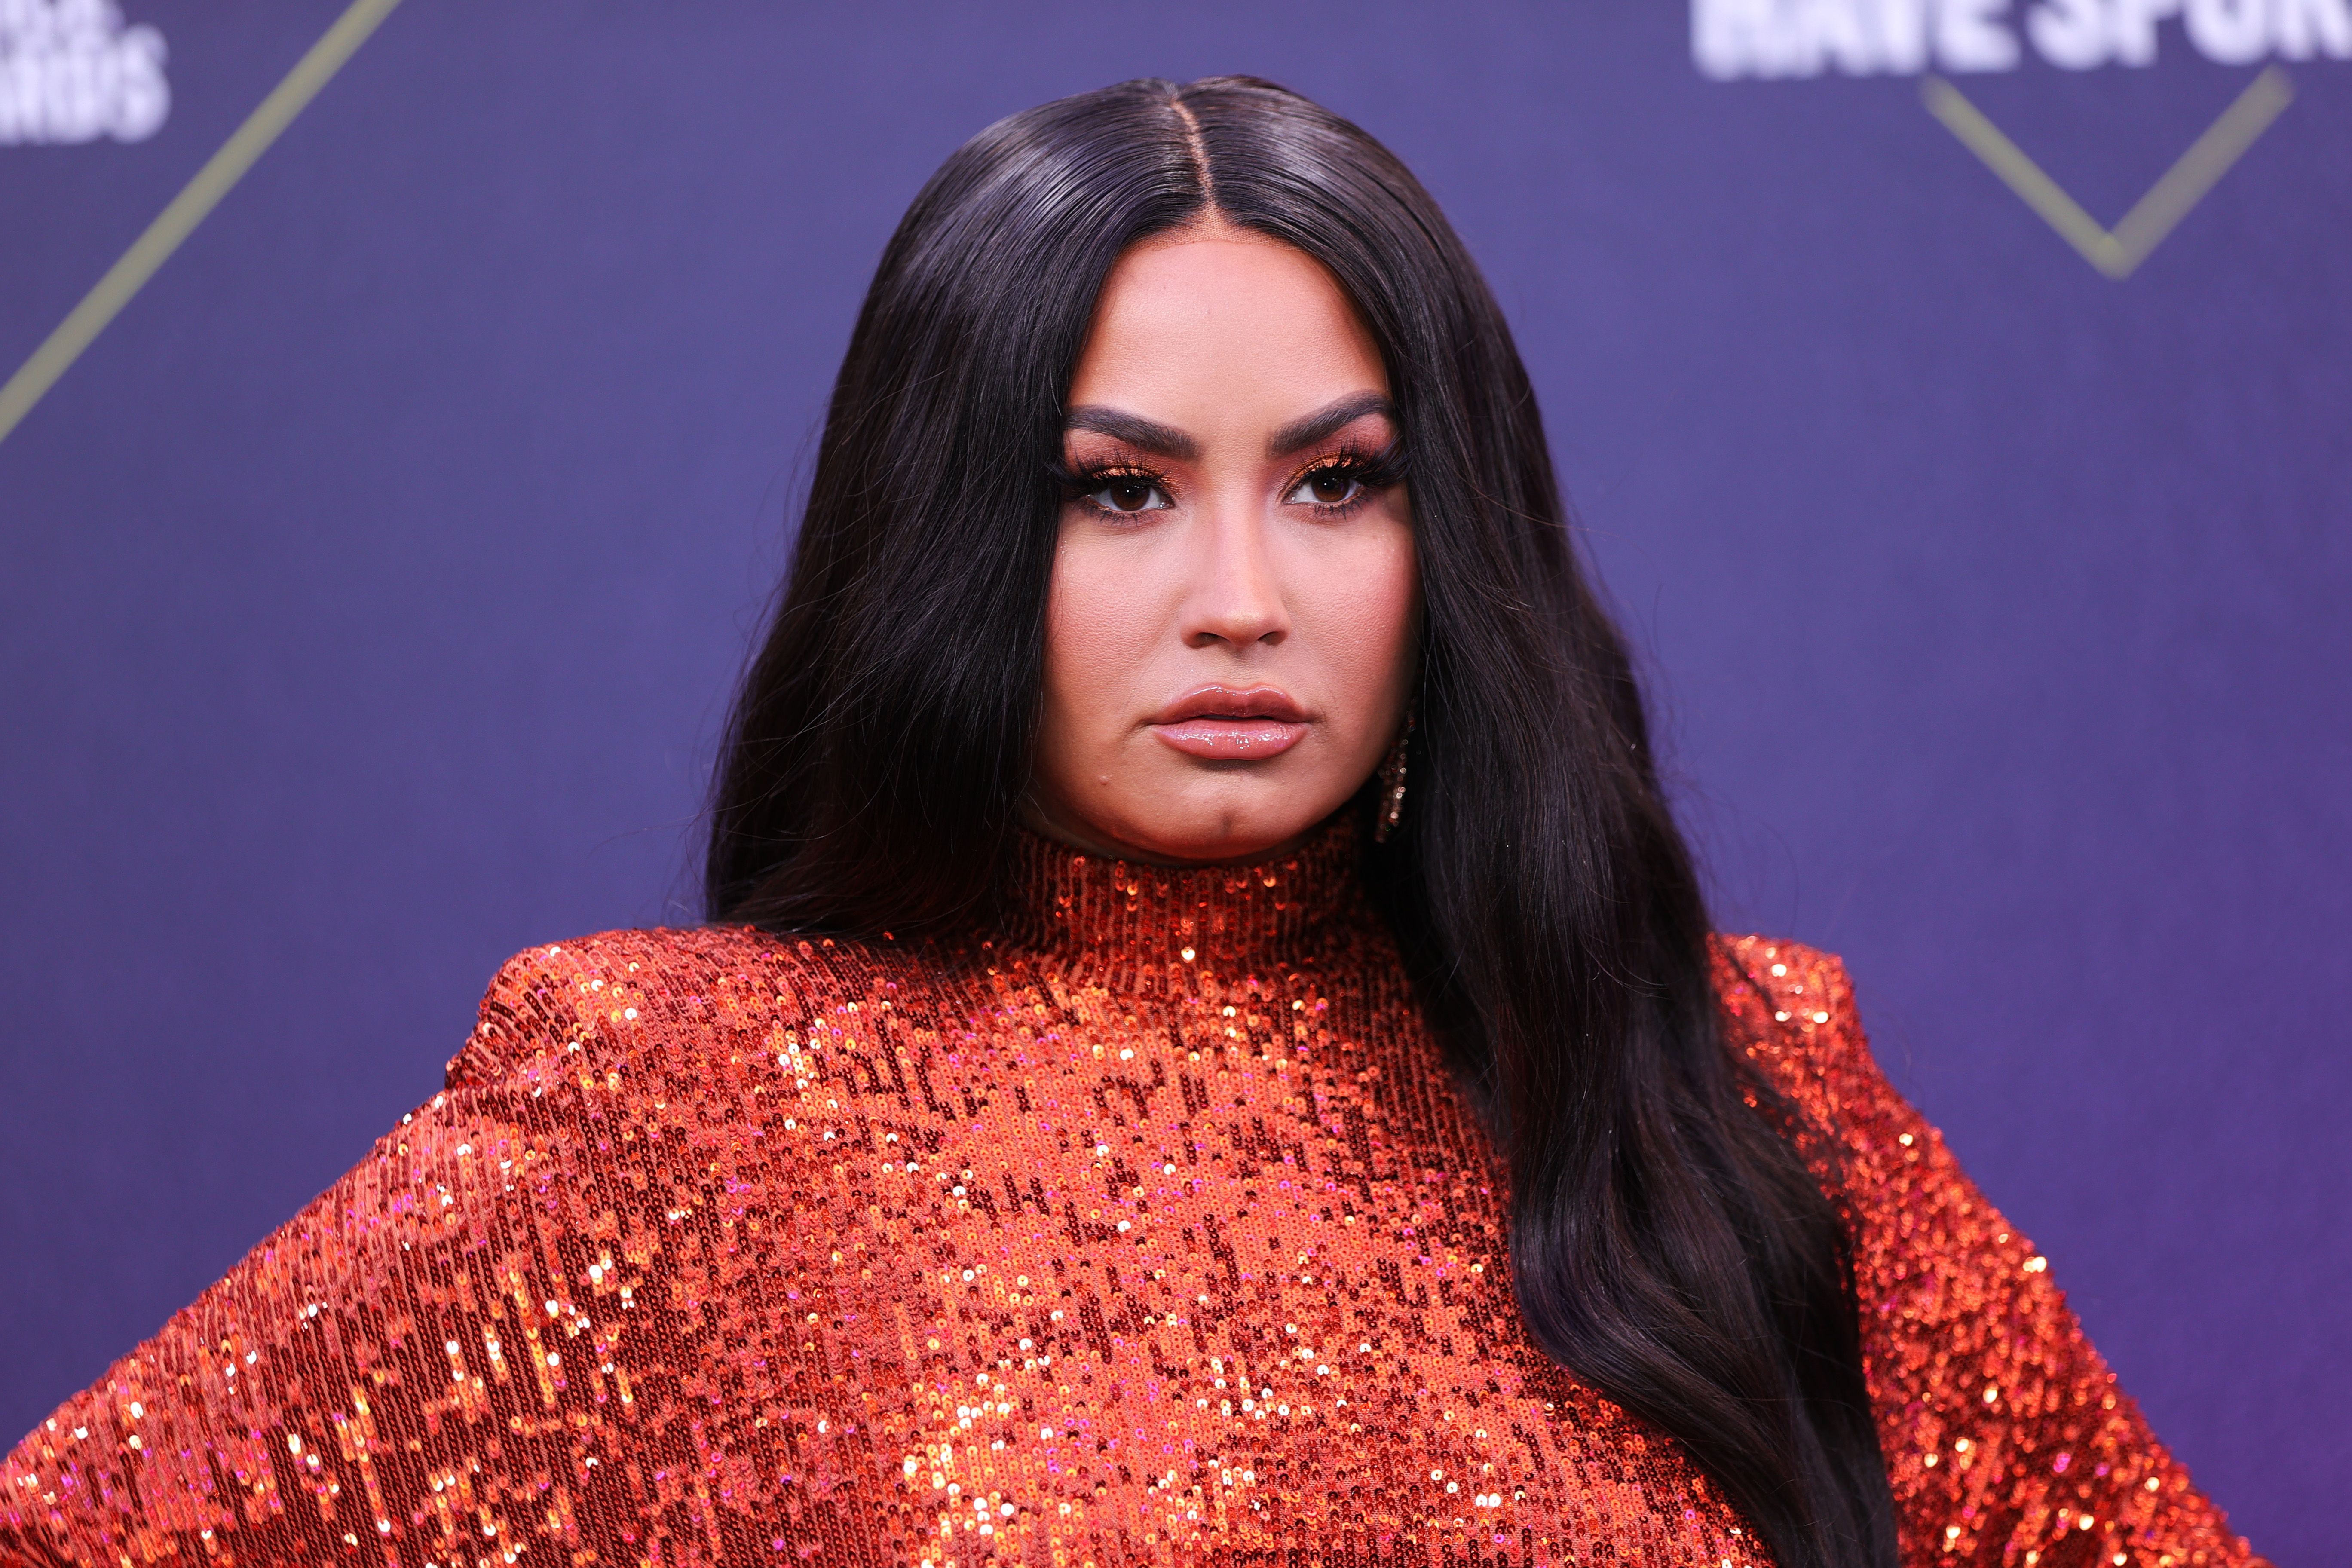 Demi Lovato at the 2020 E! People's Choice Awards on Sunday, November 15, 2020 | Photo: Getty Images